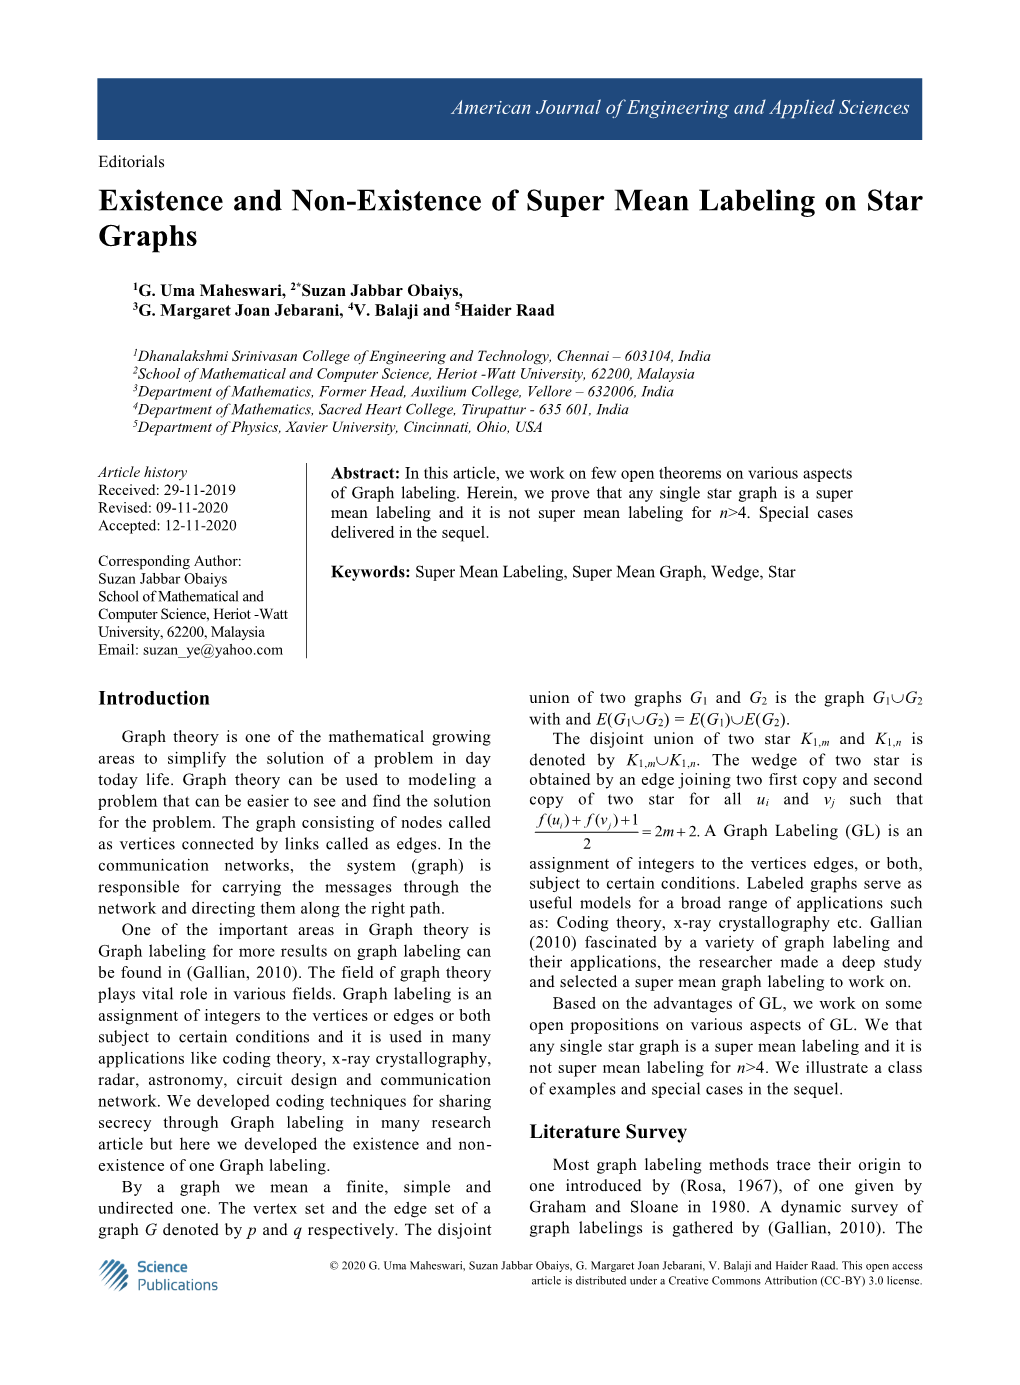 Existence and Non-Existence of Super Mean Labeling on Star Graphs